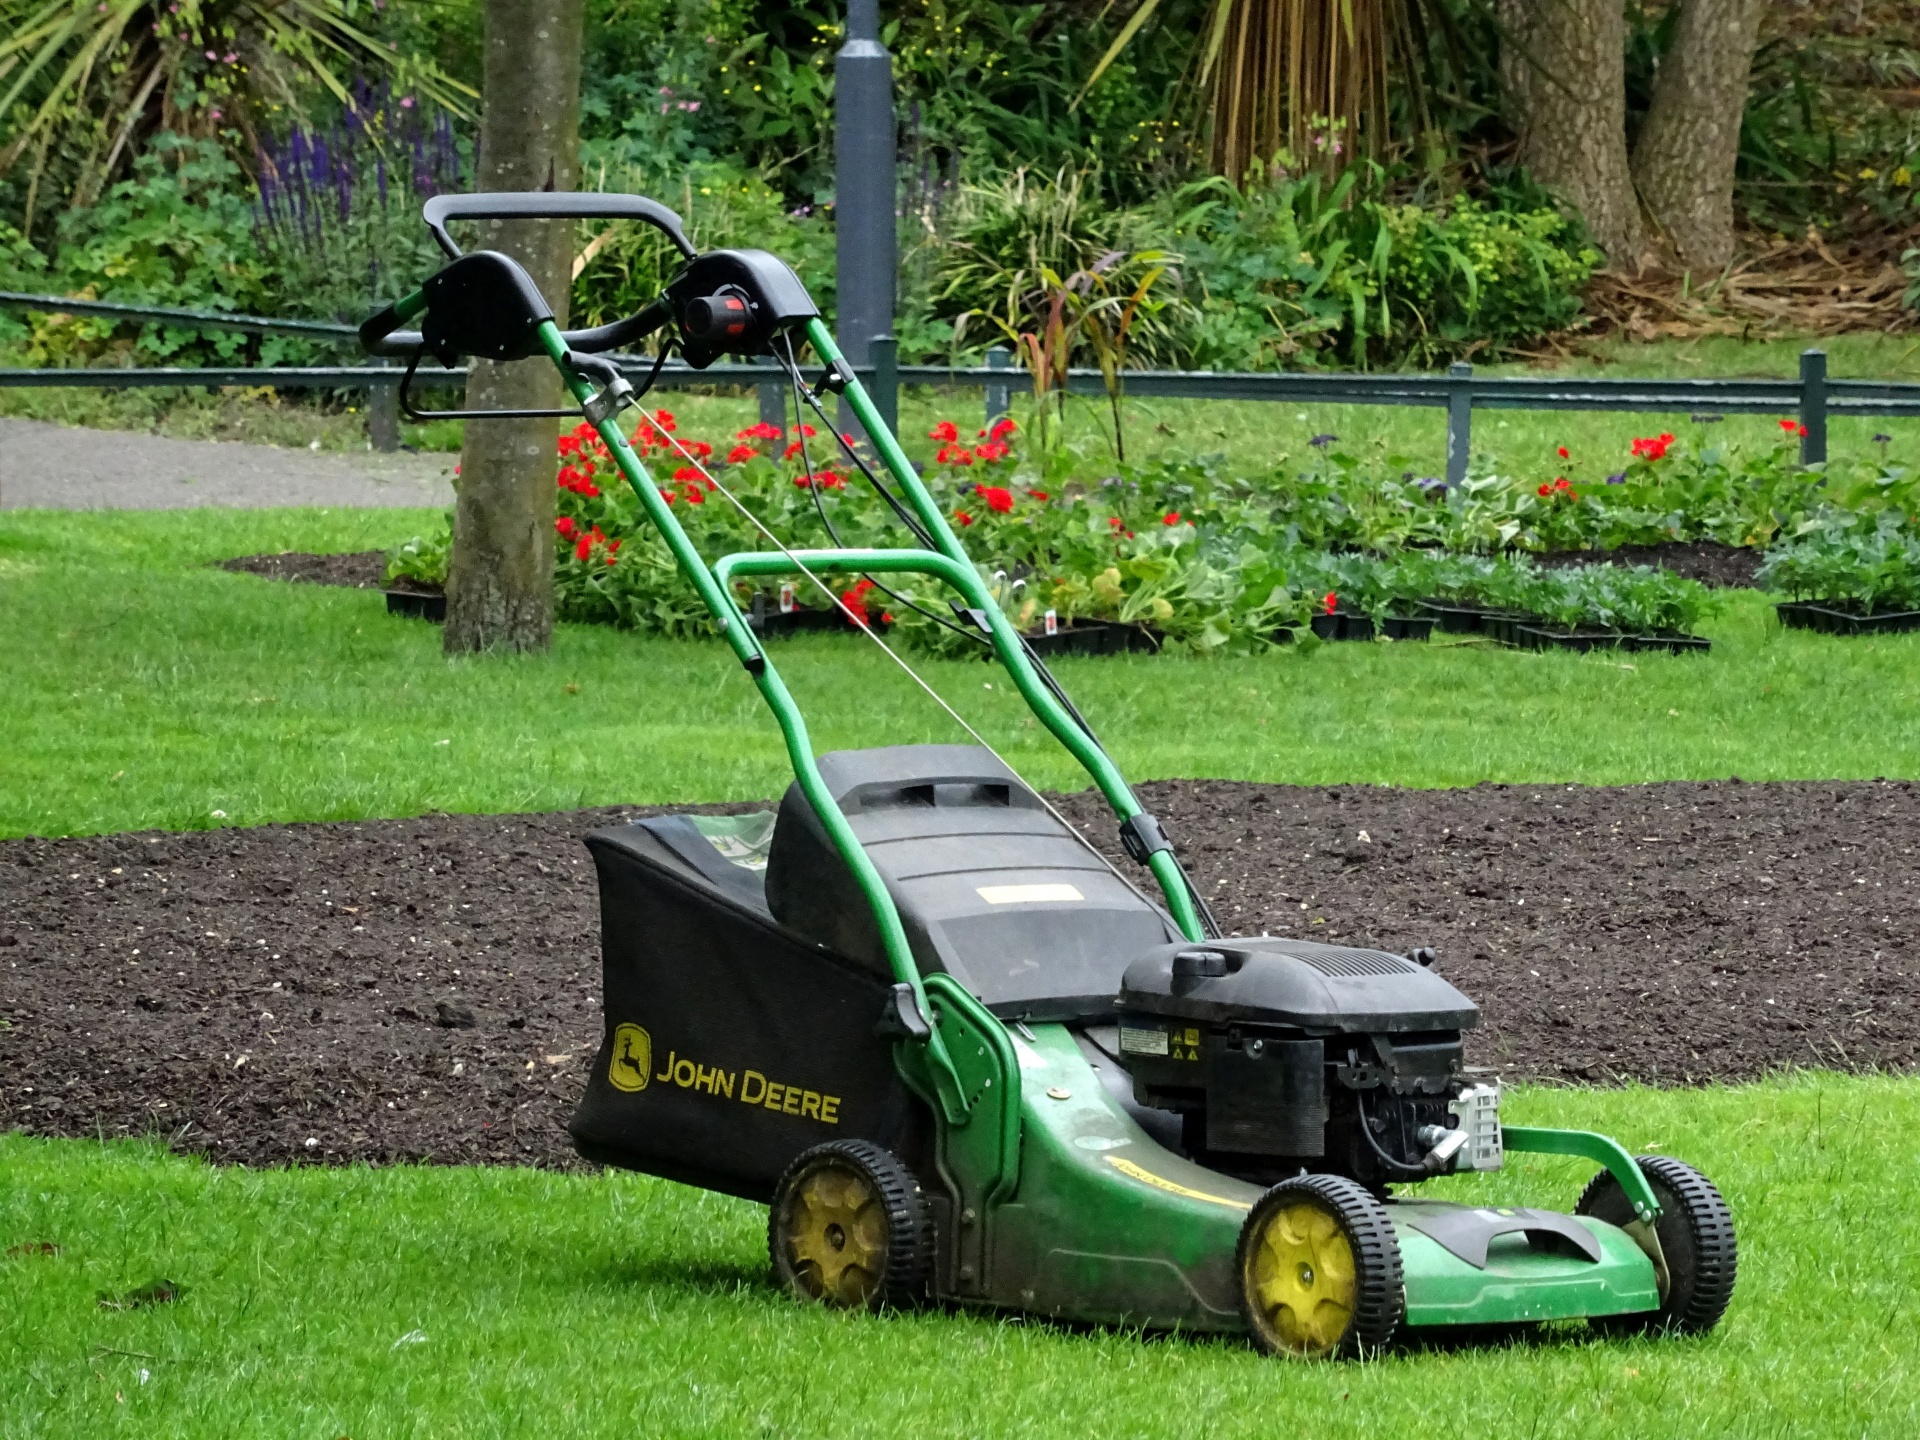 How To Start A Lawn Mower That Has Been Sitting